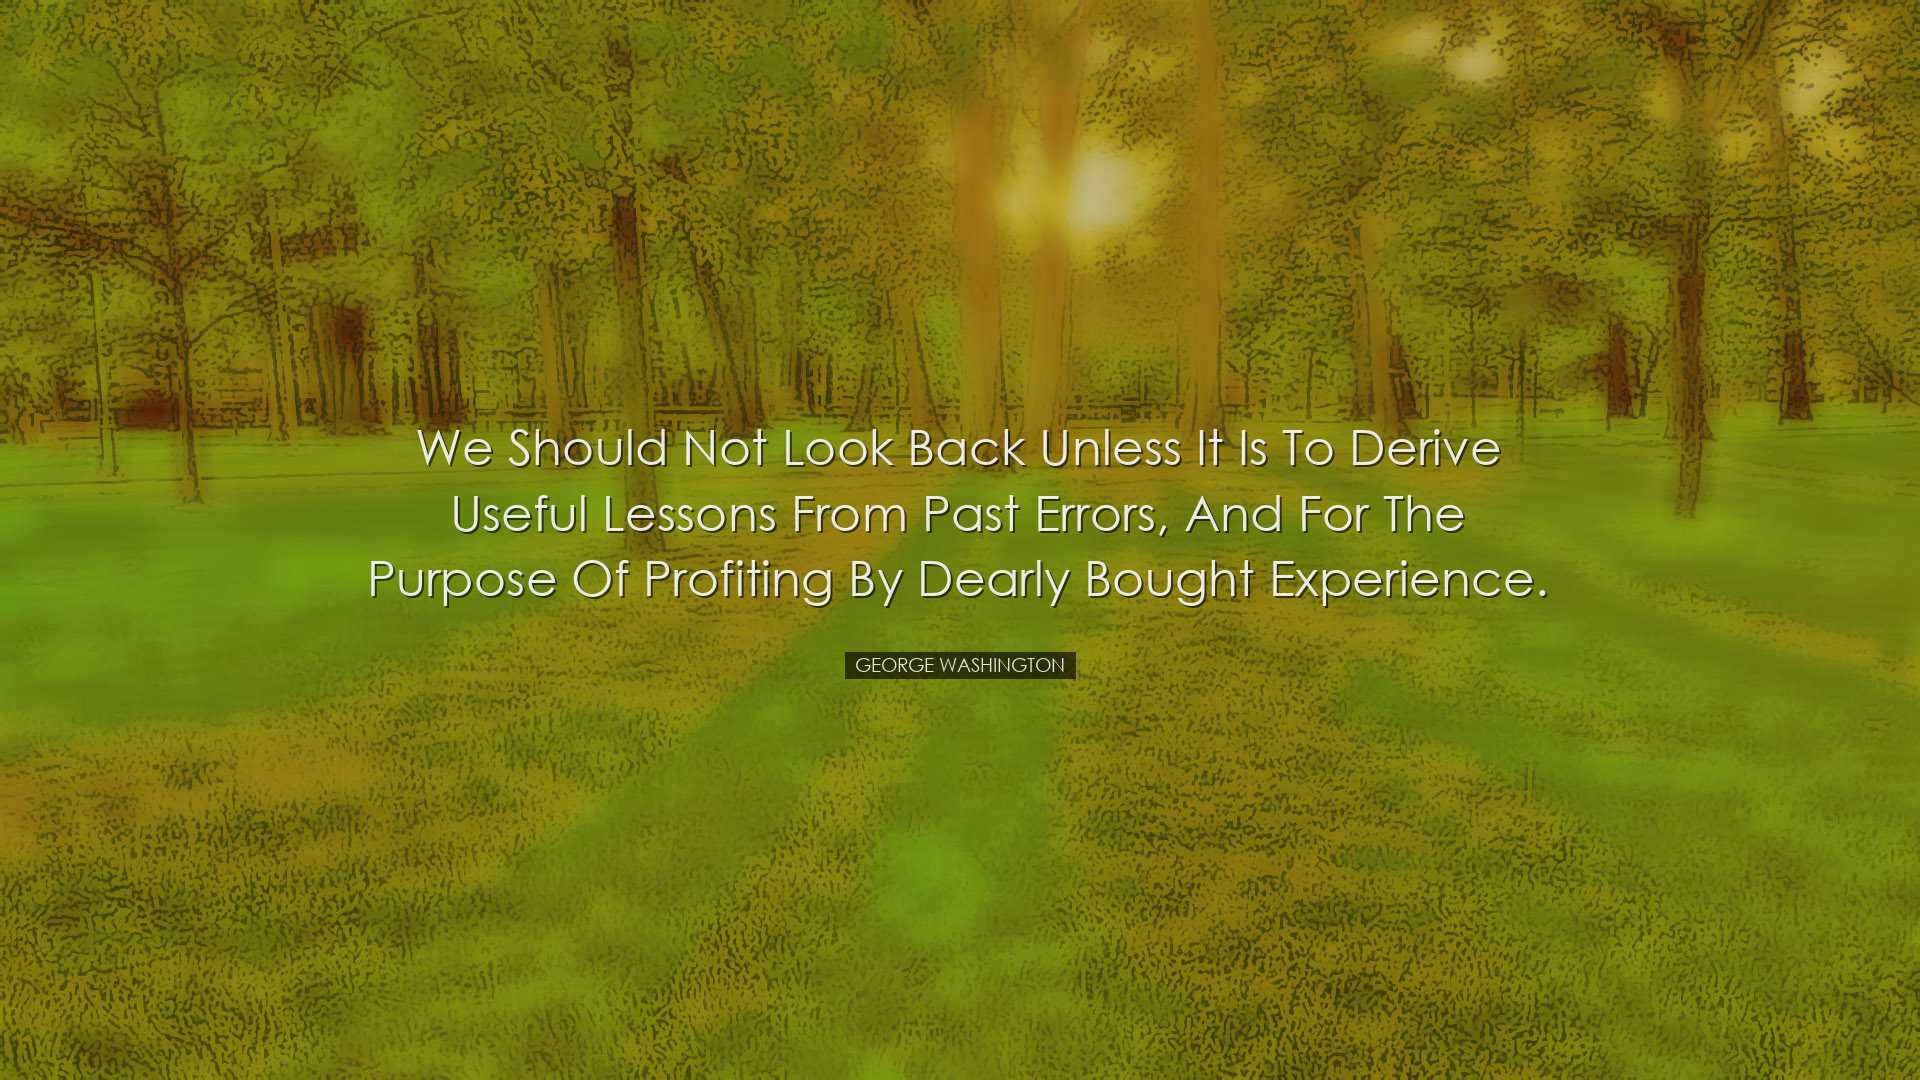 We should not look back unless it is to derive useful lessons from